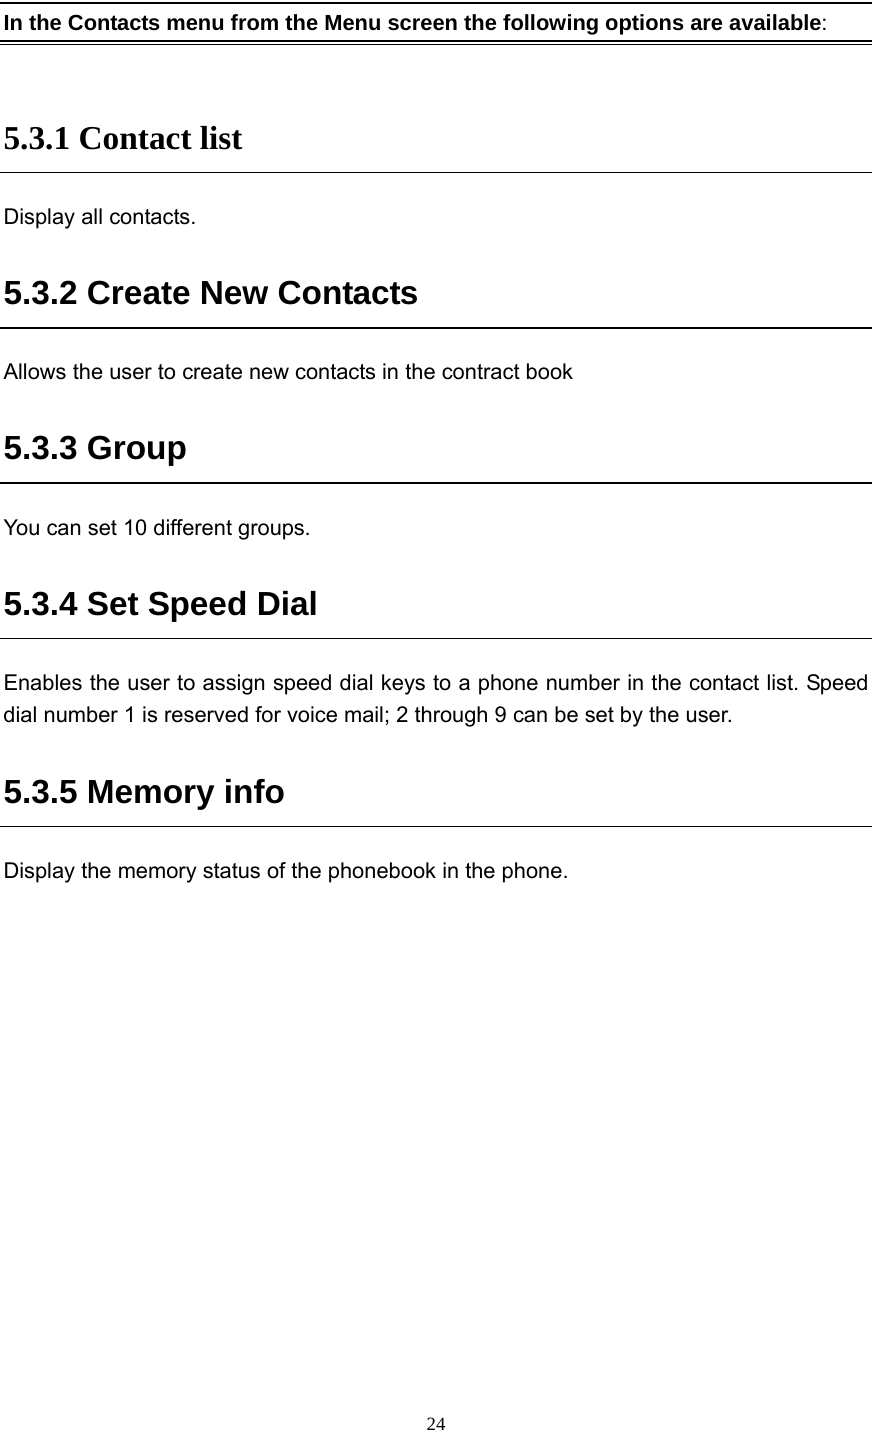  24  In the Contacts menu from the Menu screen the following options are available:  5.3.1 Contact list Display all contacts. 5.3.2 Create New Contacts Allows the user to create new contacts in the contract book 5.3.3 Group You can set 10 different groups. 5.3.4 Set Speed Dial Enables the user to assign speed dial keys to a phone number in the contact list. Speed dial number 1 is reserved for voice mail; 2 through 9 can be set by the user. 5.3.5 Memory info Display the memory status of the phonebook in the phone.     